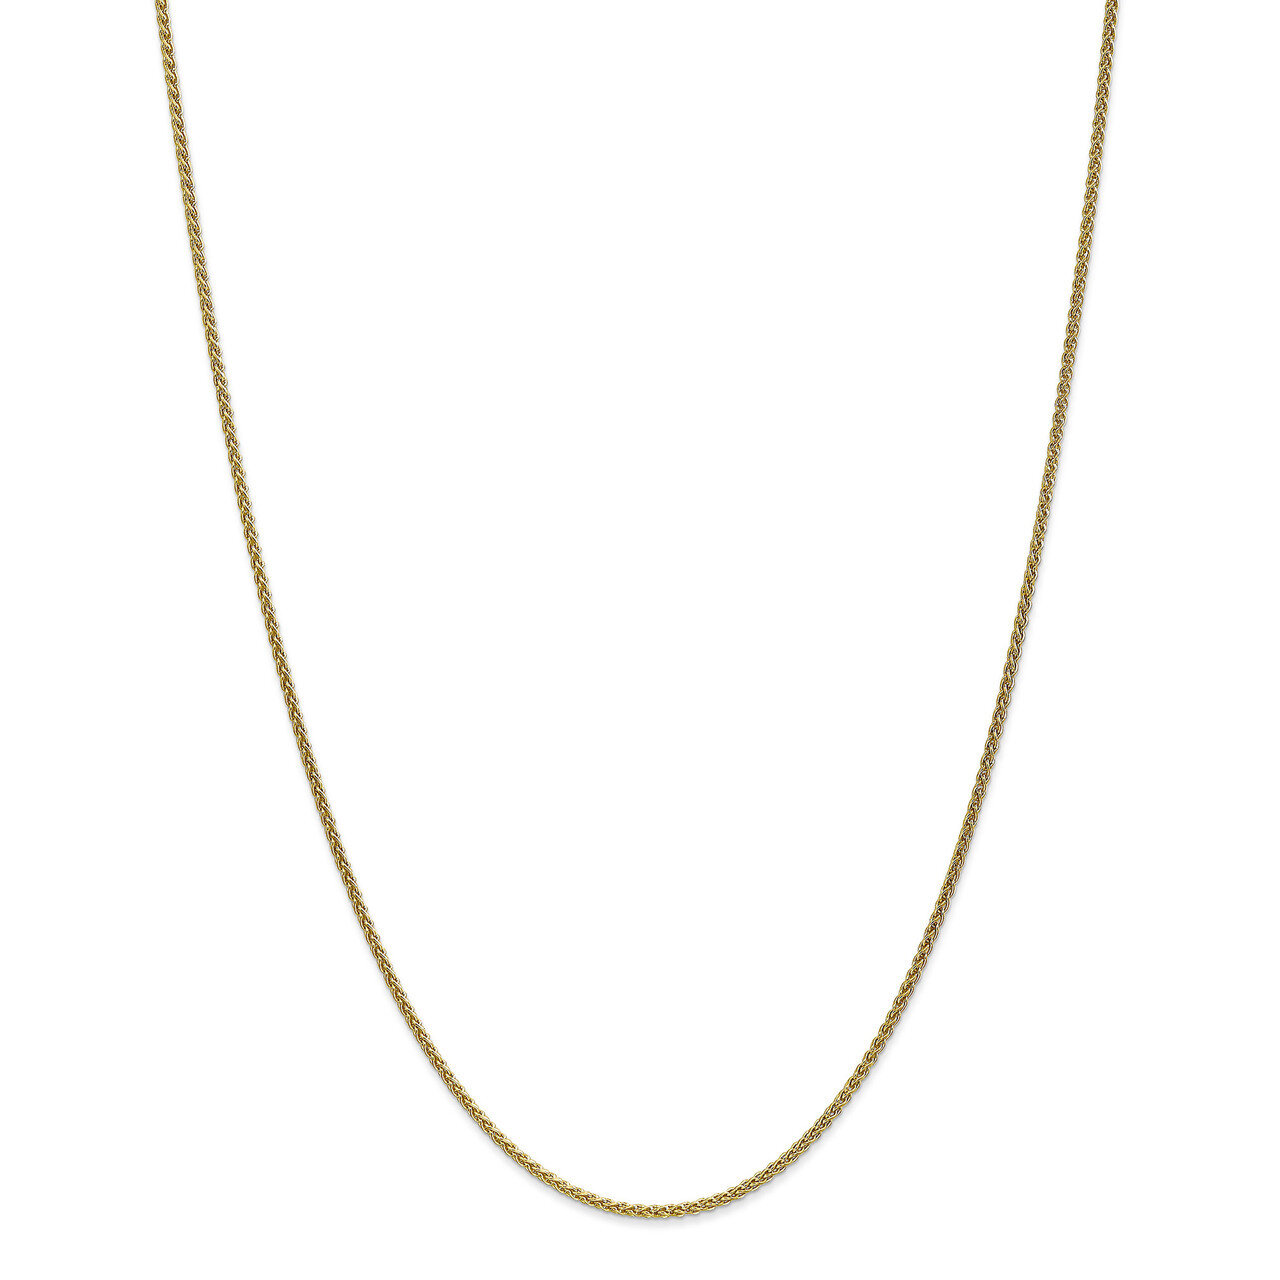 30 Inch 1.65mm Solid Polished Spiga Chain 10k Gold 10SPG040-30